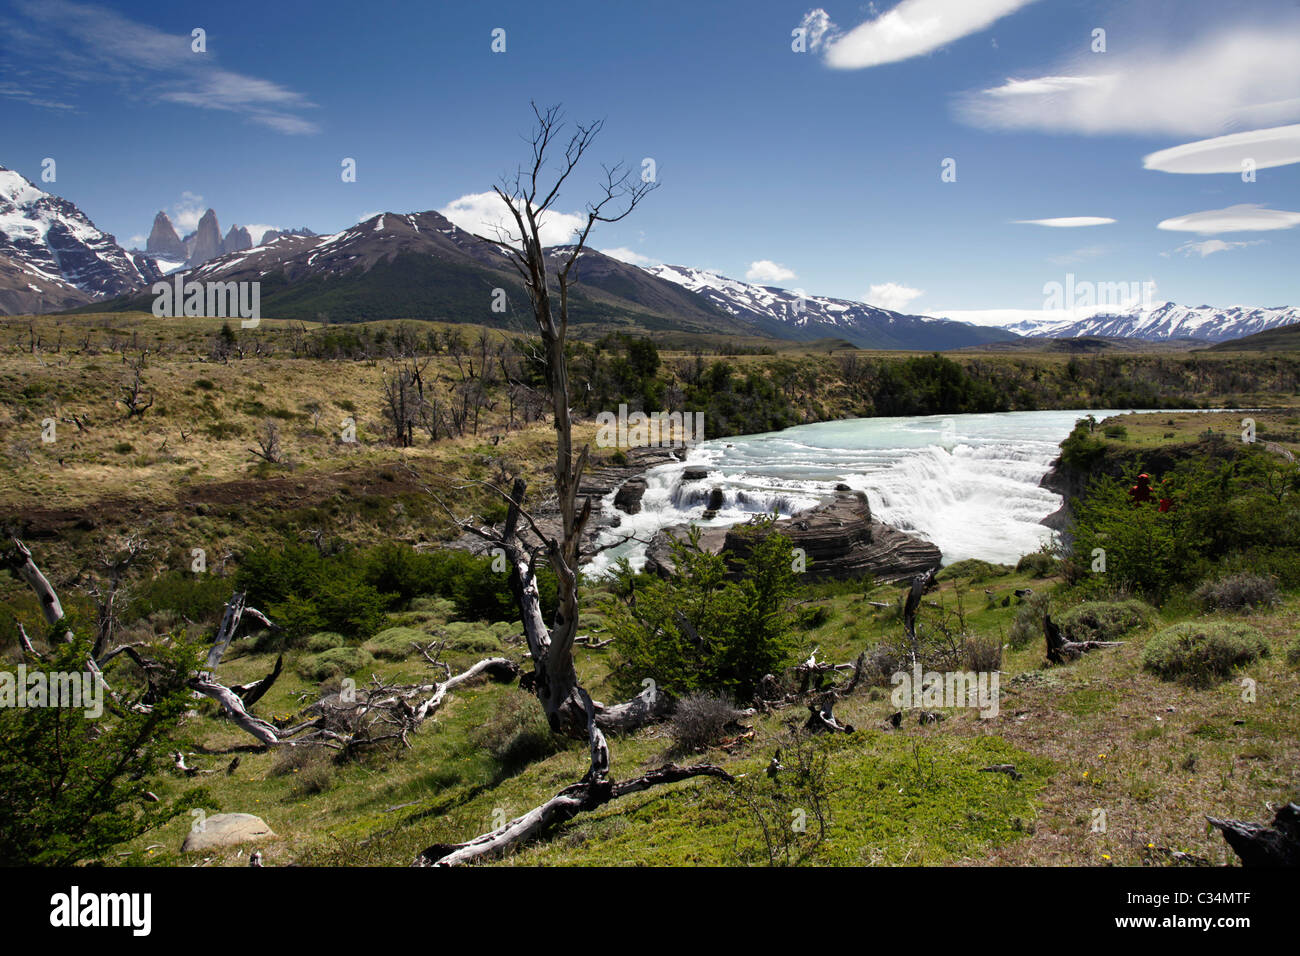 Views of Torres del Paine and River Paine, Patagonia, Chile, South America. Stock Photo